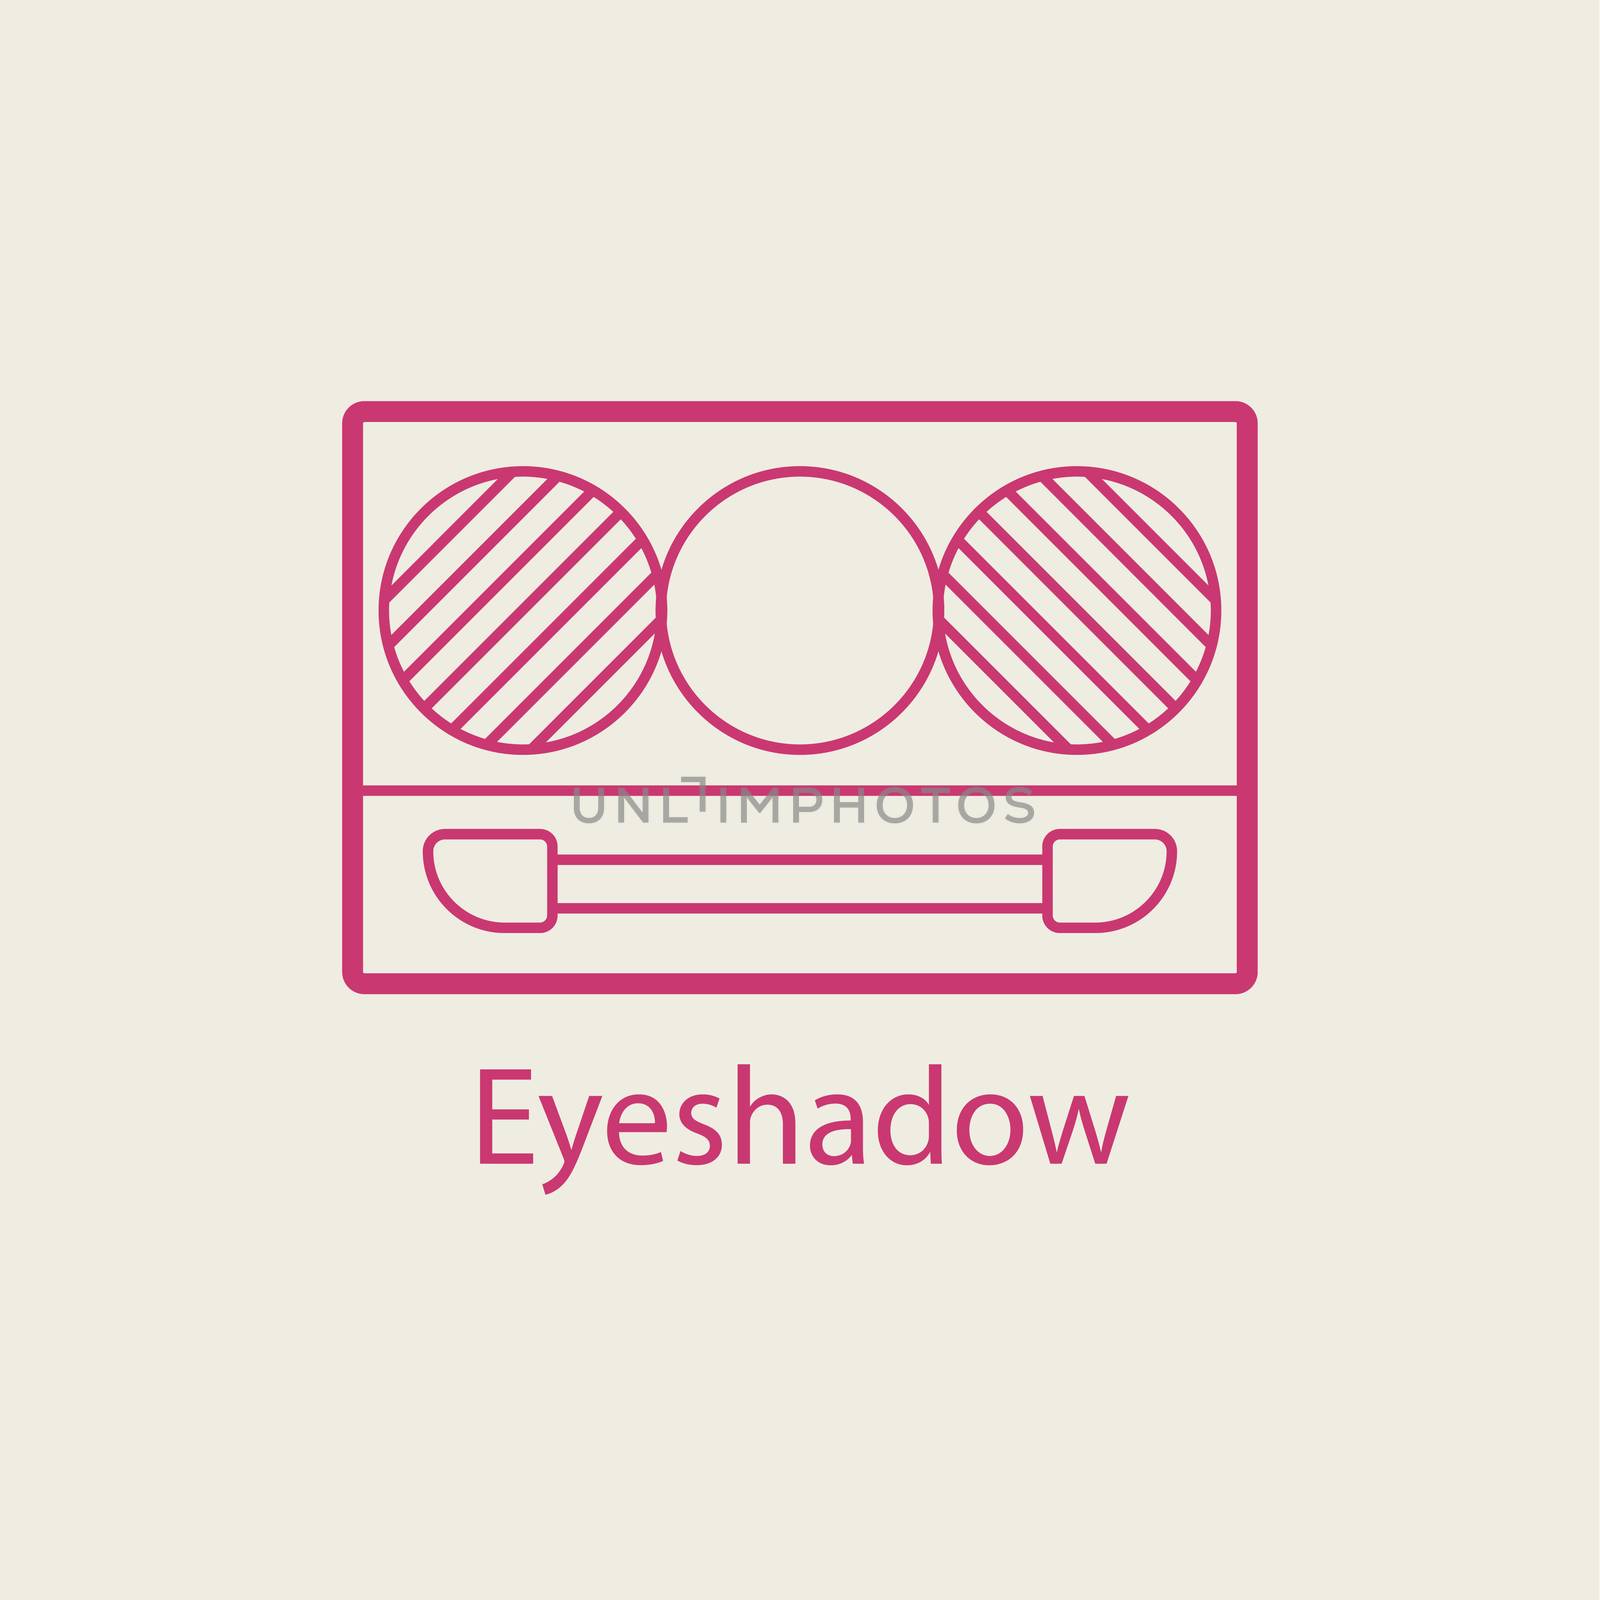  cosmetic eyeshadow line icon. Eye shadow pallete thin linear signs for makeup and visage.